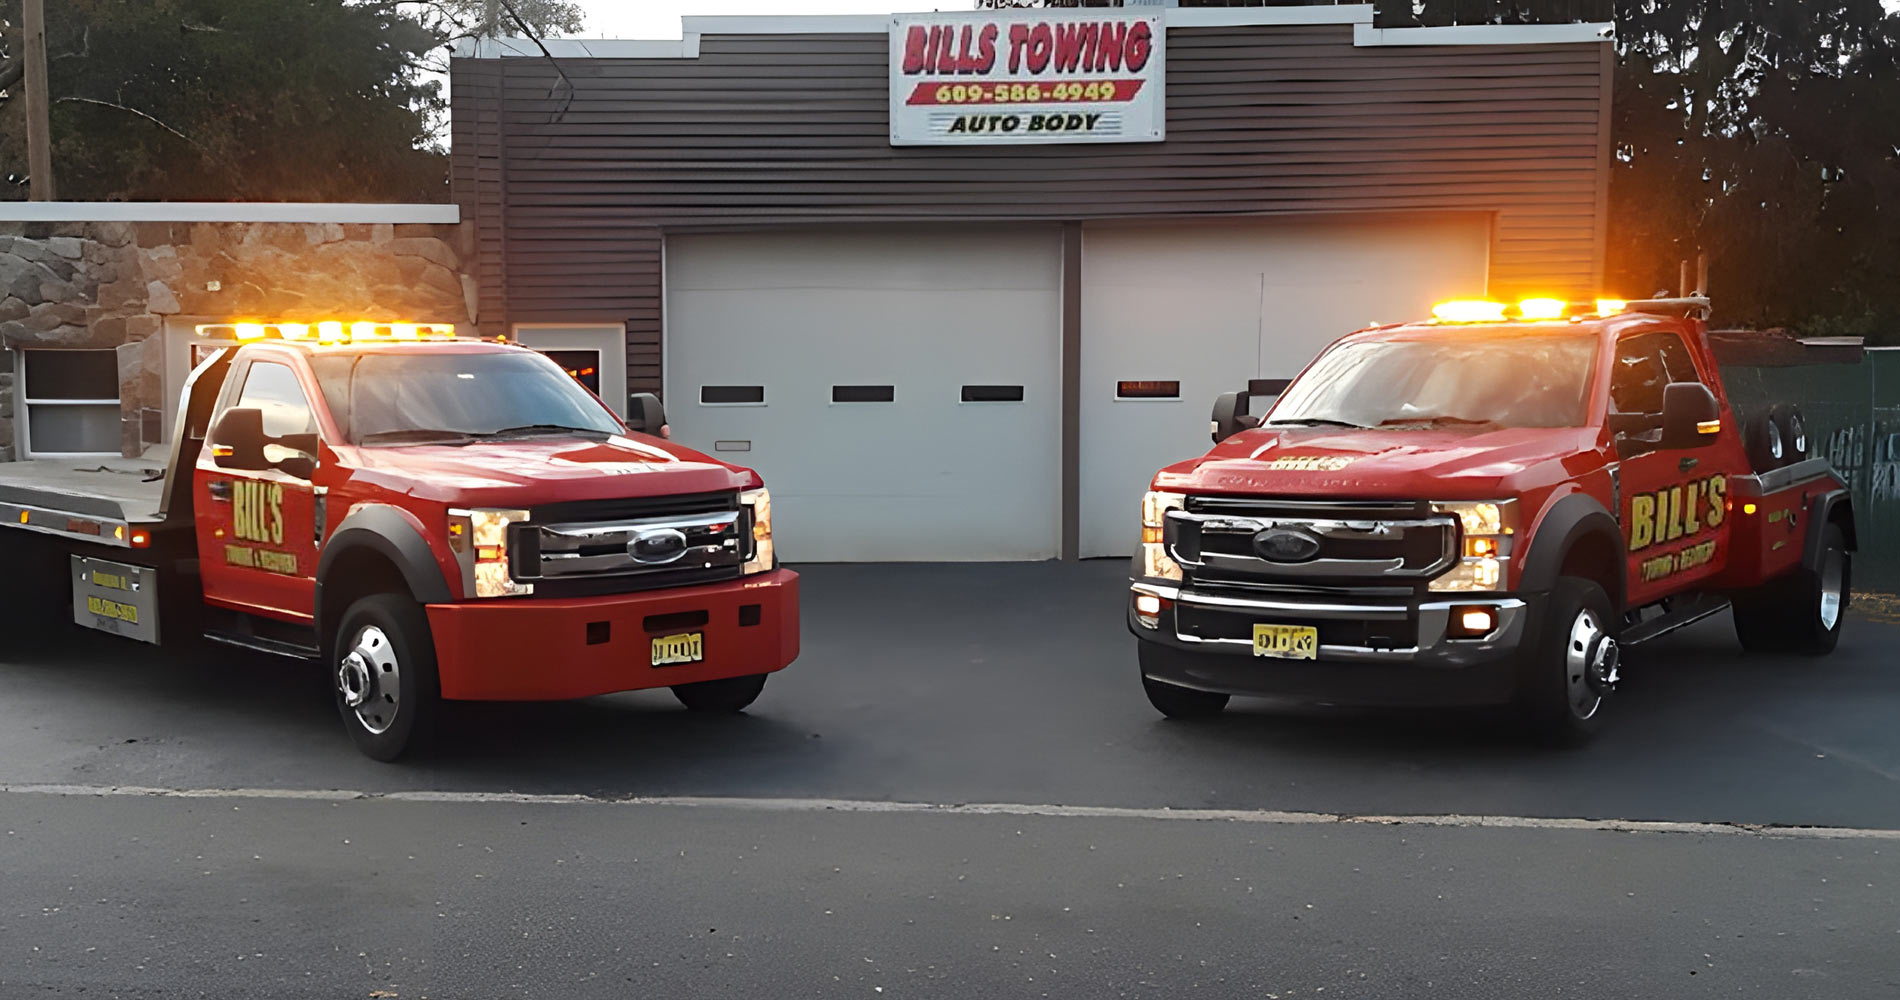 Bill's Towing | Chesterfield, NJ 08515